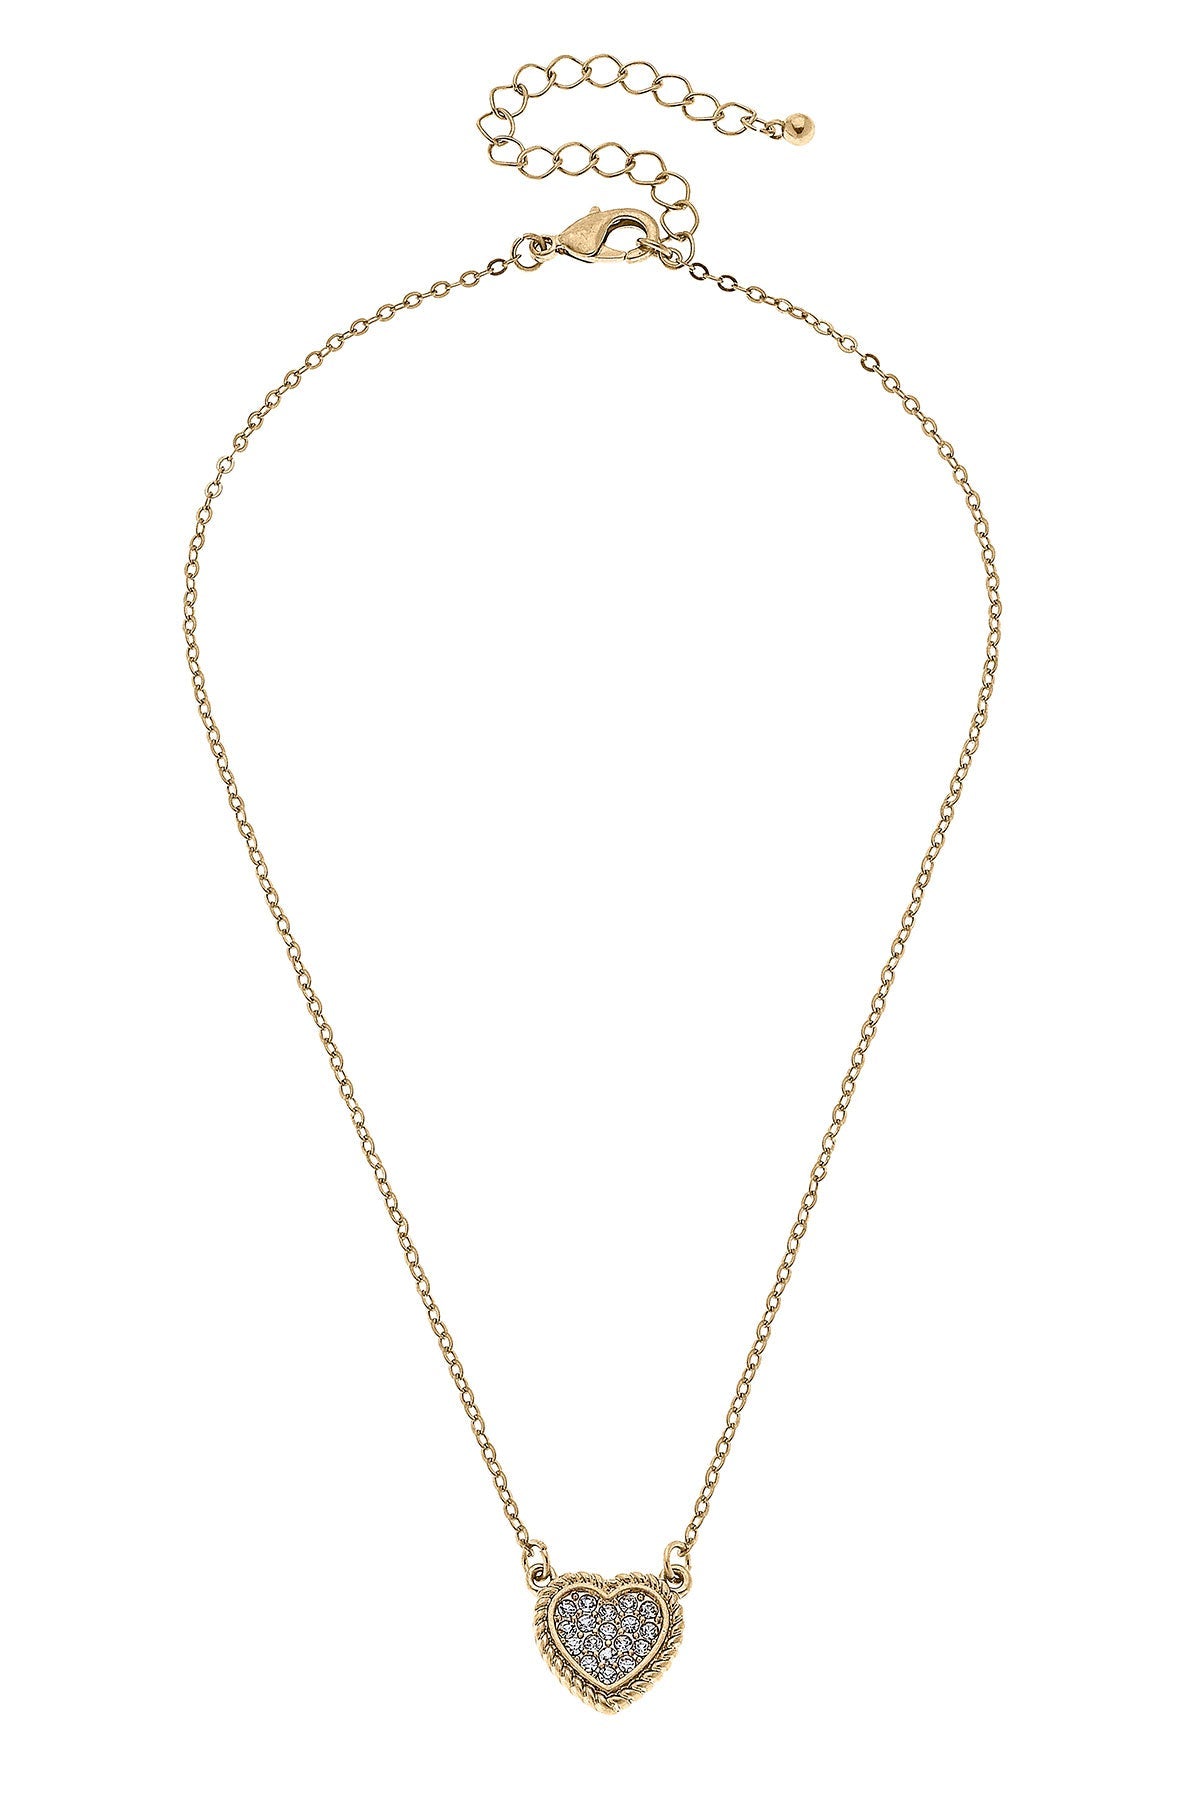 Corrine Pavé Heart Charm Necklace in Worn Gold by CANVAS